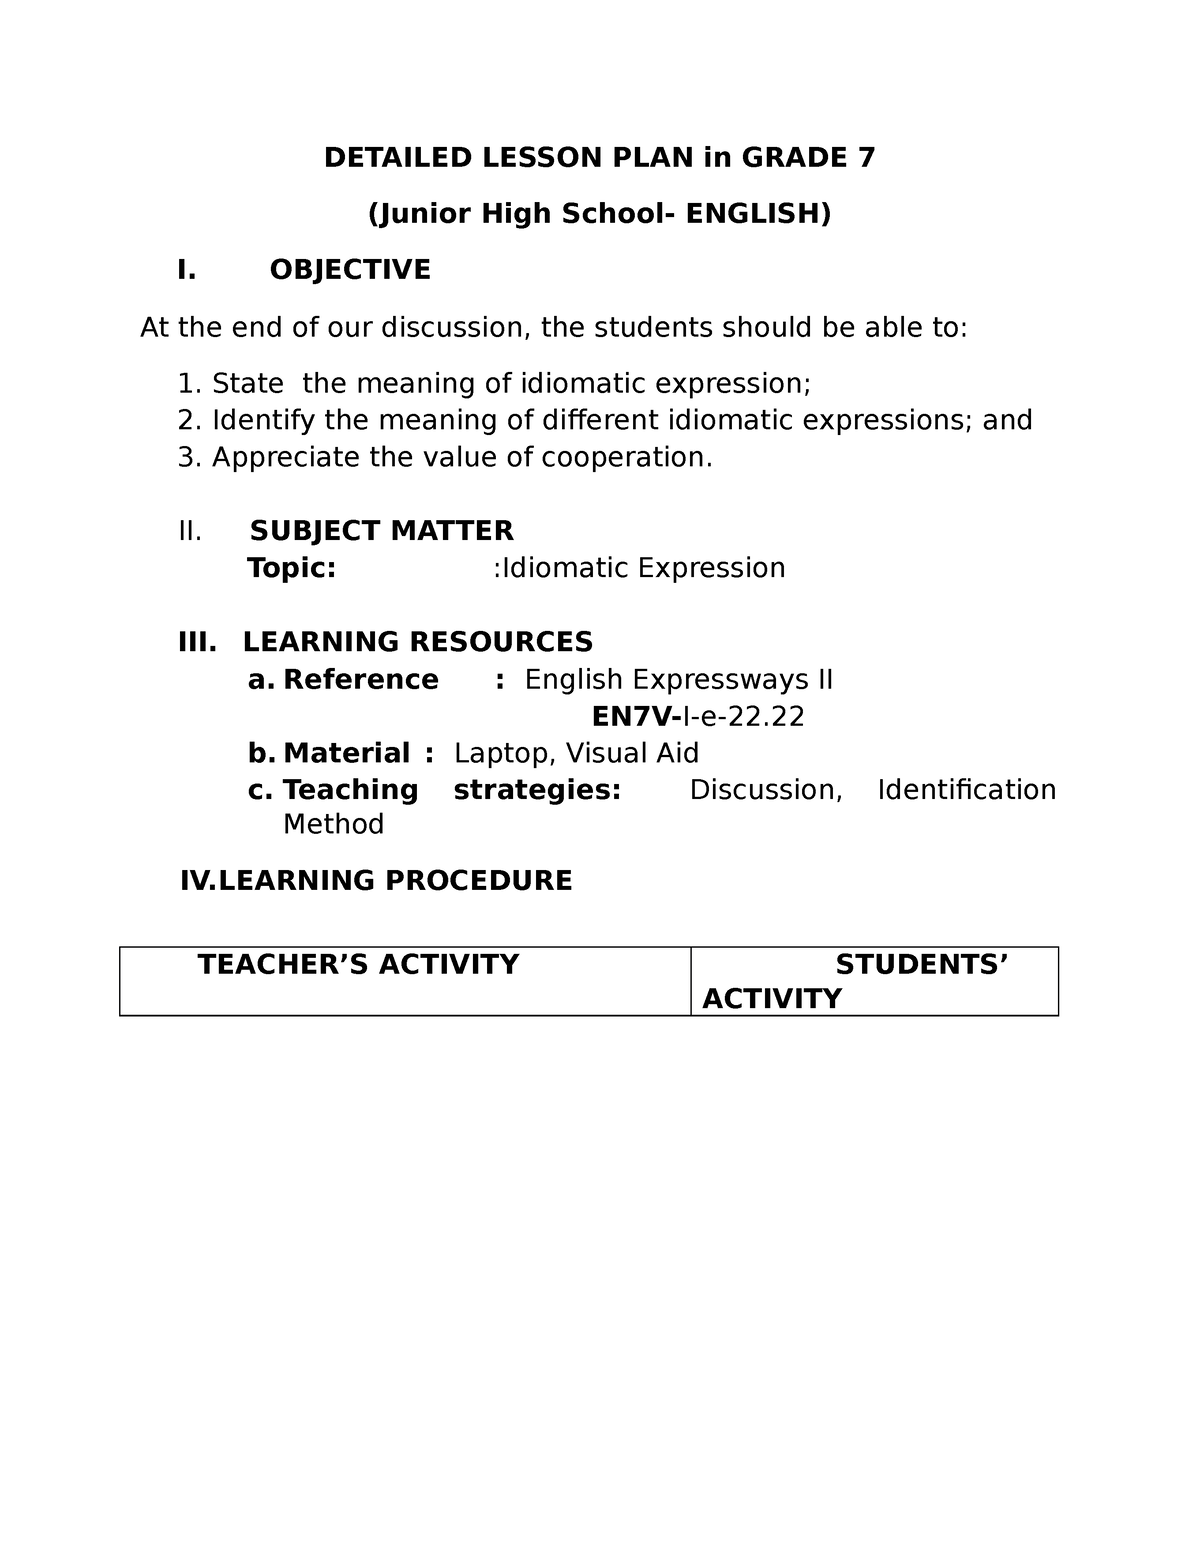 dlp-it-is-helpful-to-us-detailed-lesson-plan-in-grade-7-junior